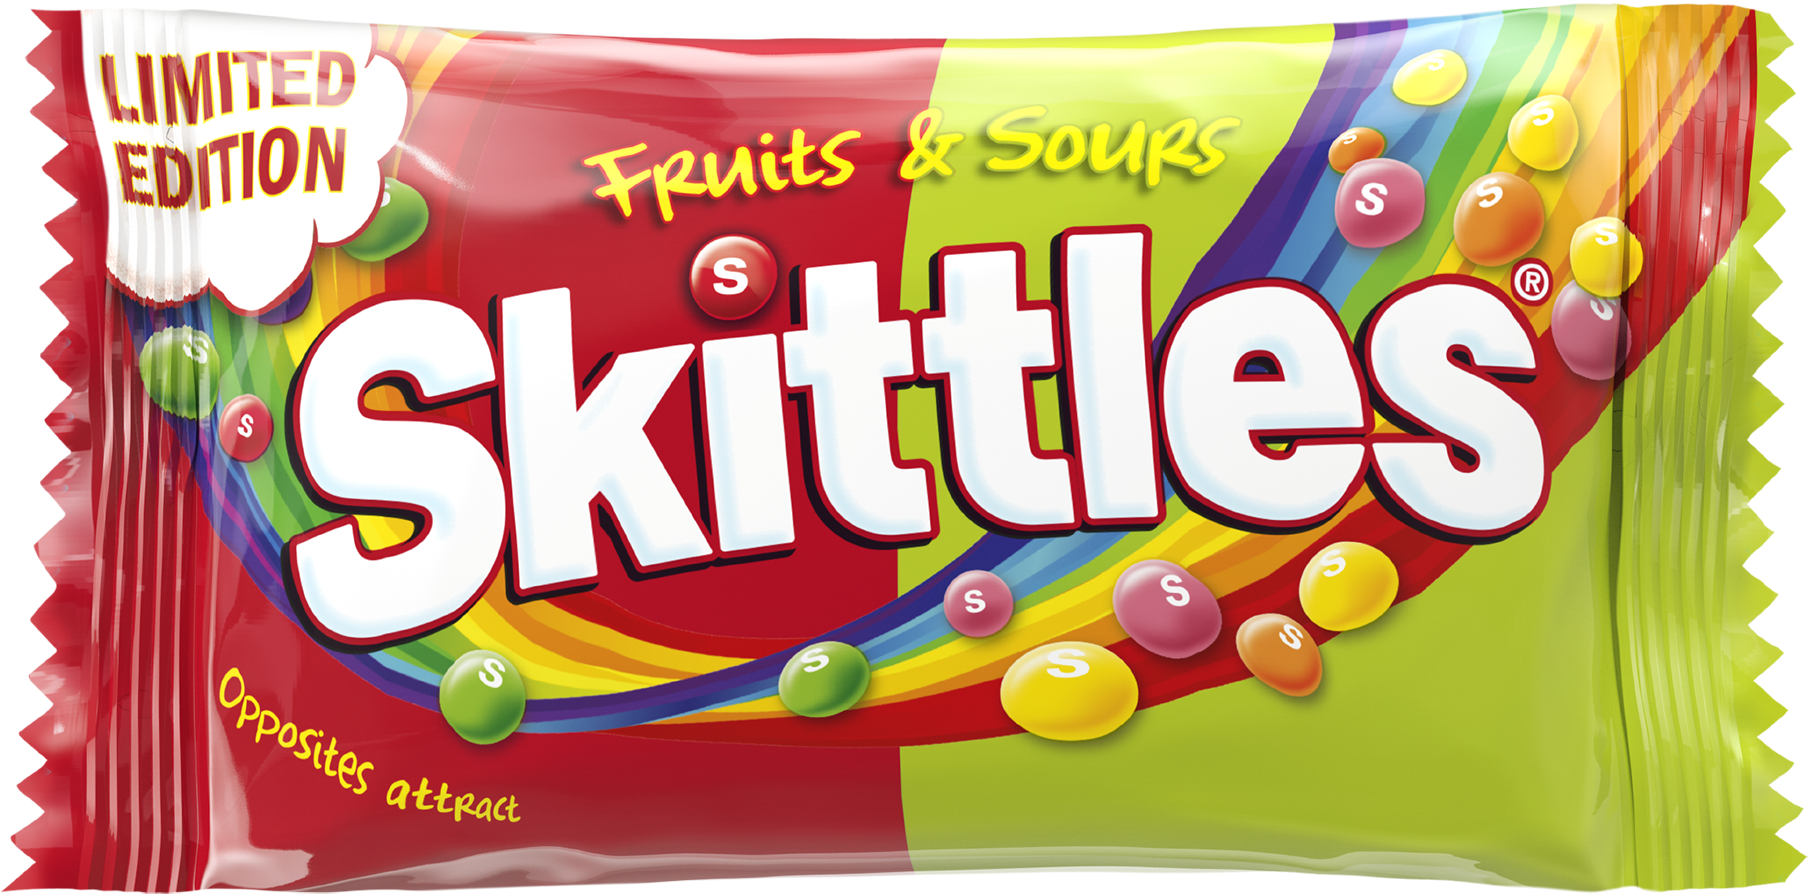 Skittles Fruits & Sours 55g (1920x1920)